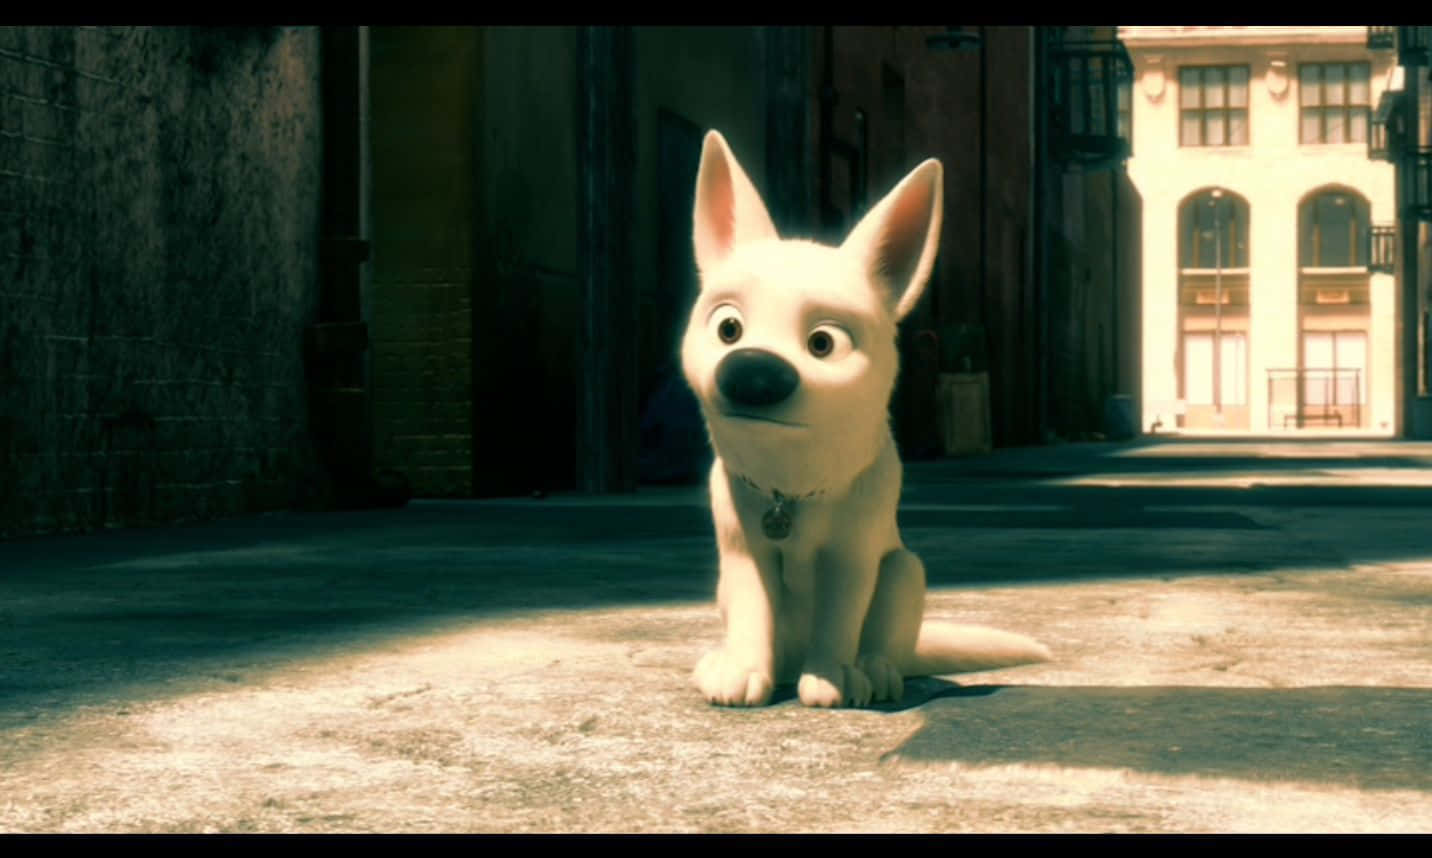 See Disney's Bolt, the superhero pup, leap into the air!